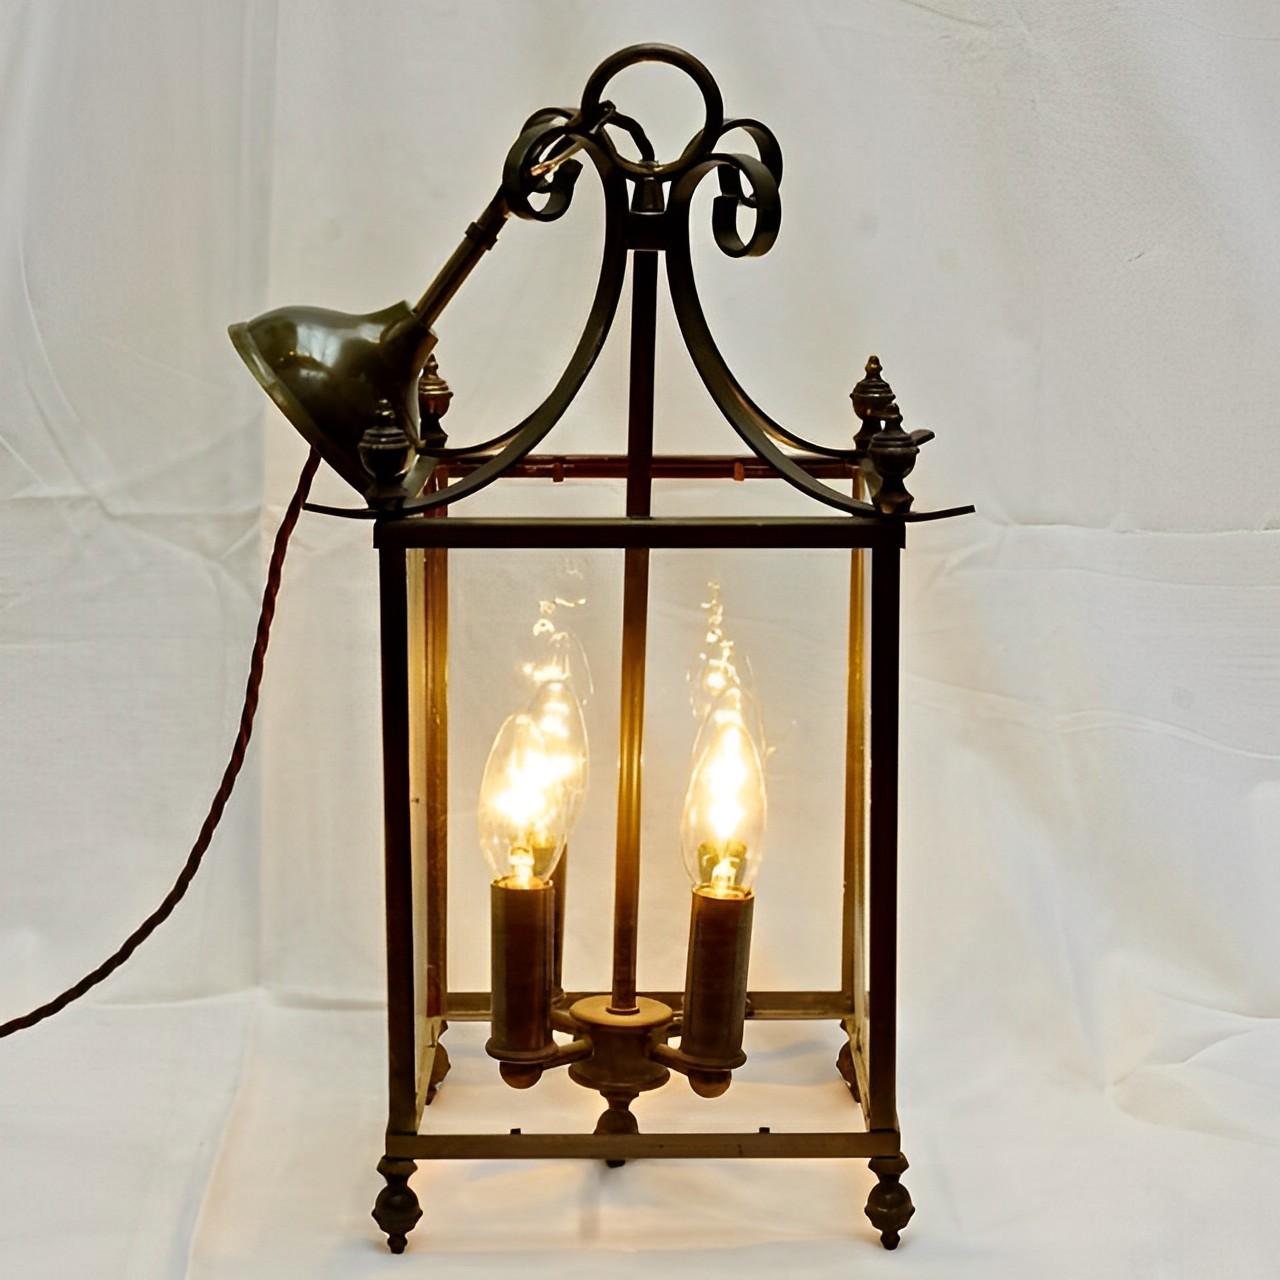 Large glazed four light French lantern in a stylish simple design. The lantern has been rewired for the UK, and pat tested. It has four metres of dark brown twist flex.

This wonderful classic lantern dates to the mid-20th century.